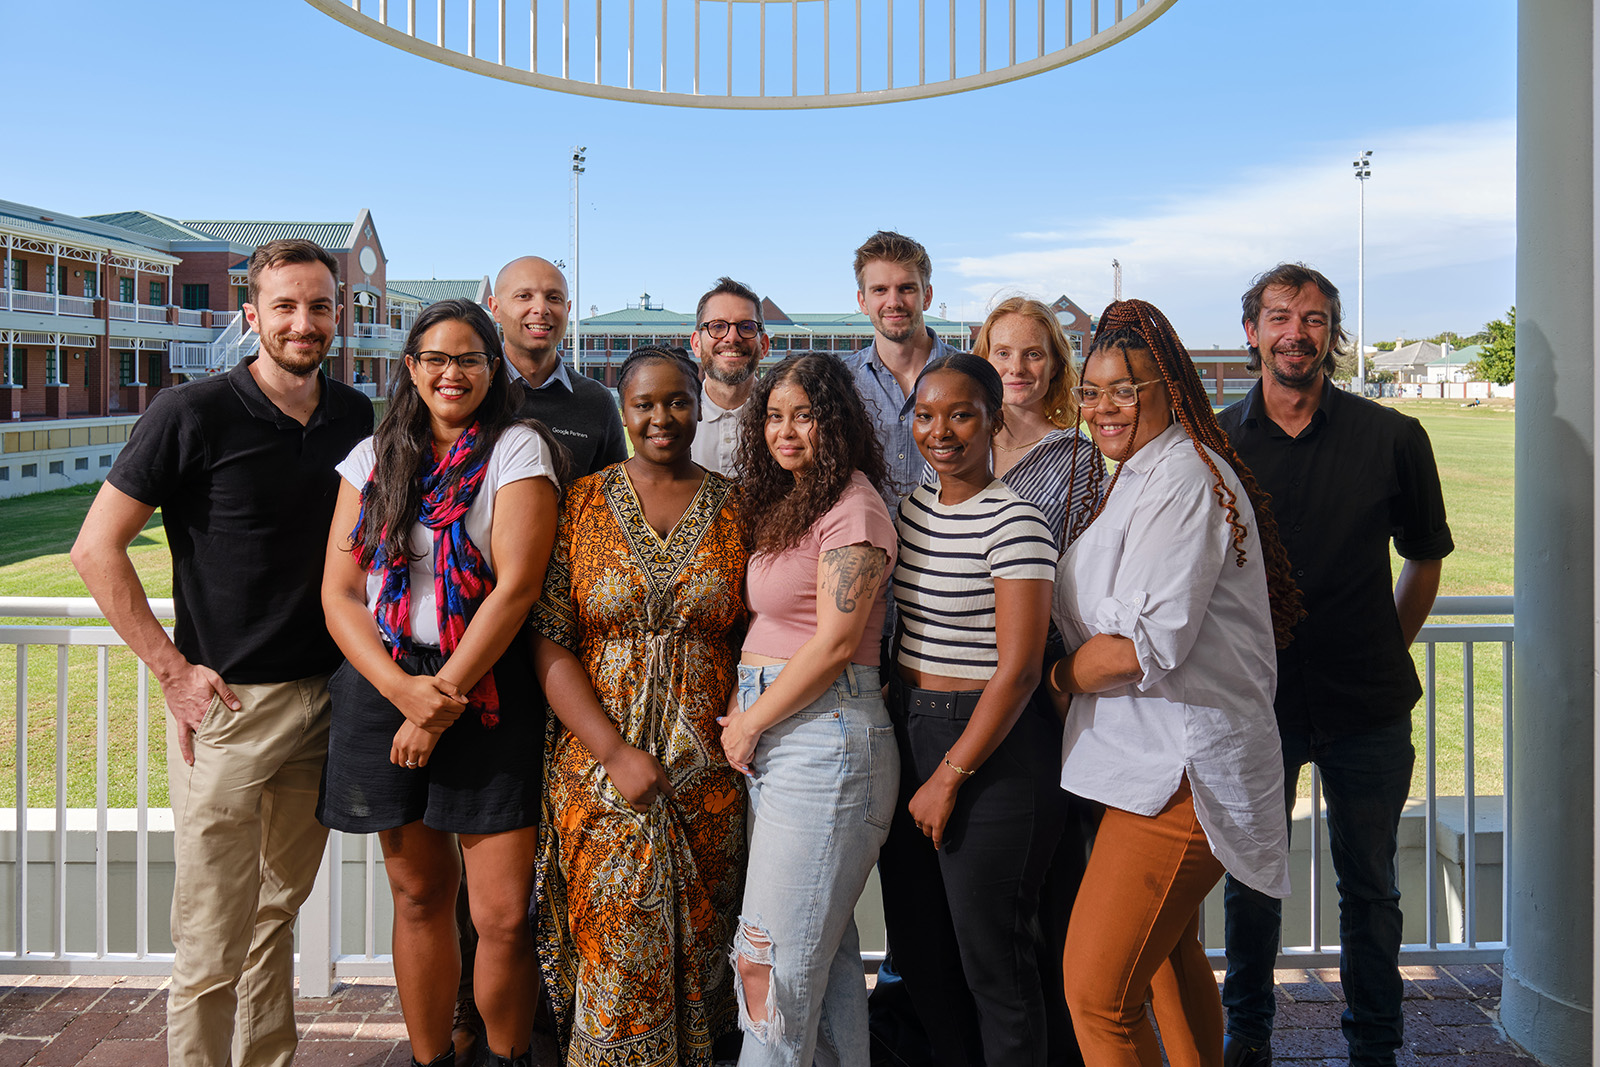 The Ethical Agency Cape Town team